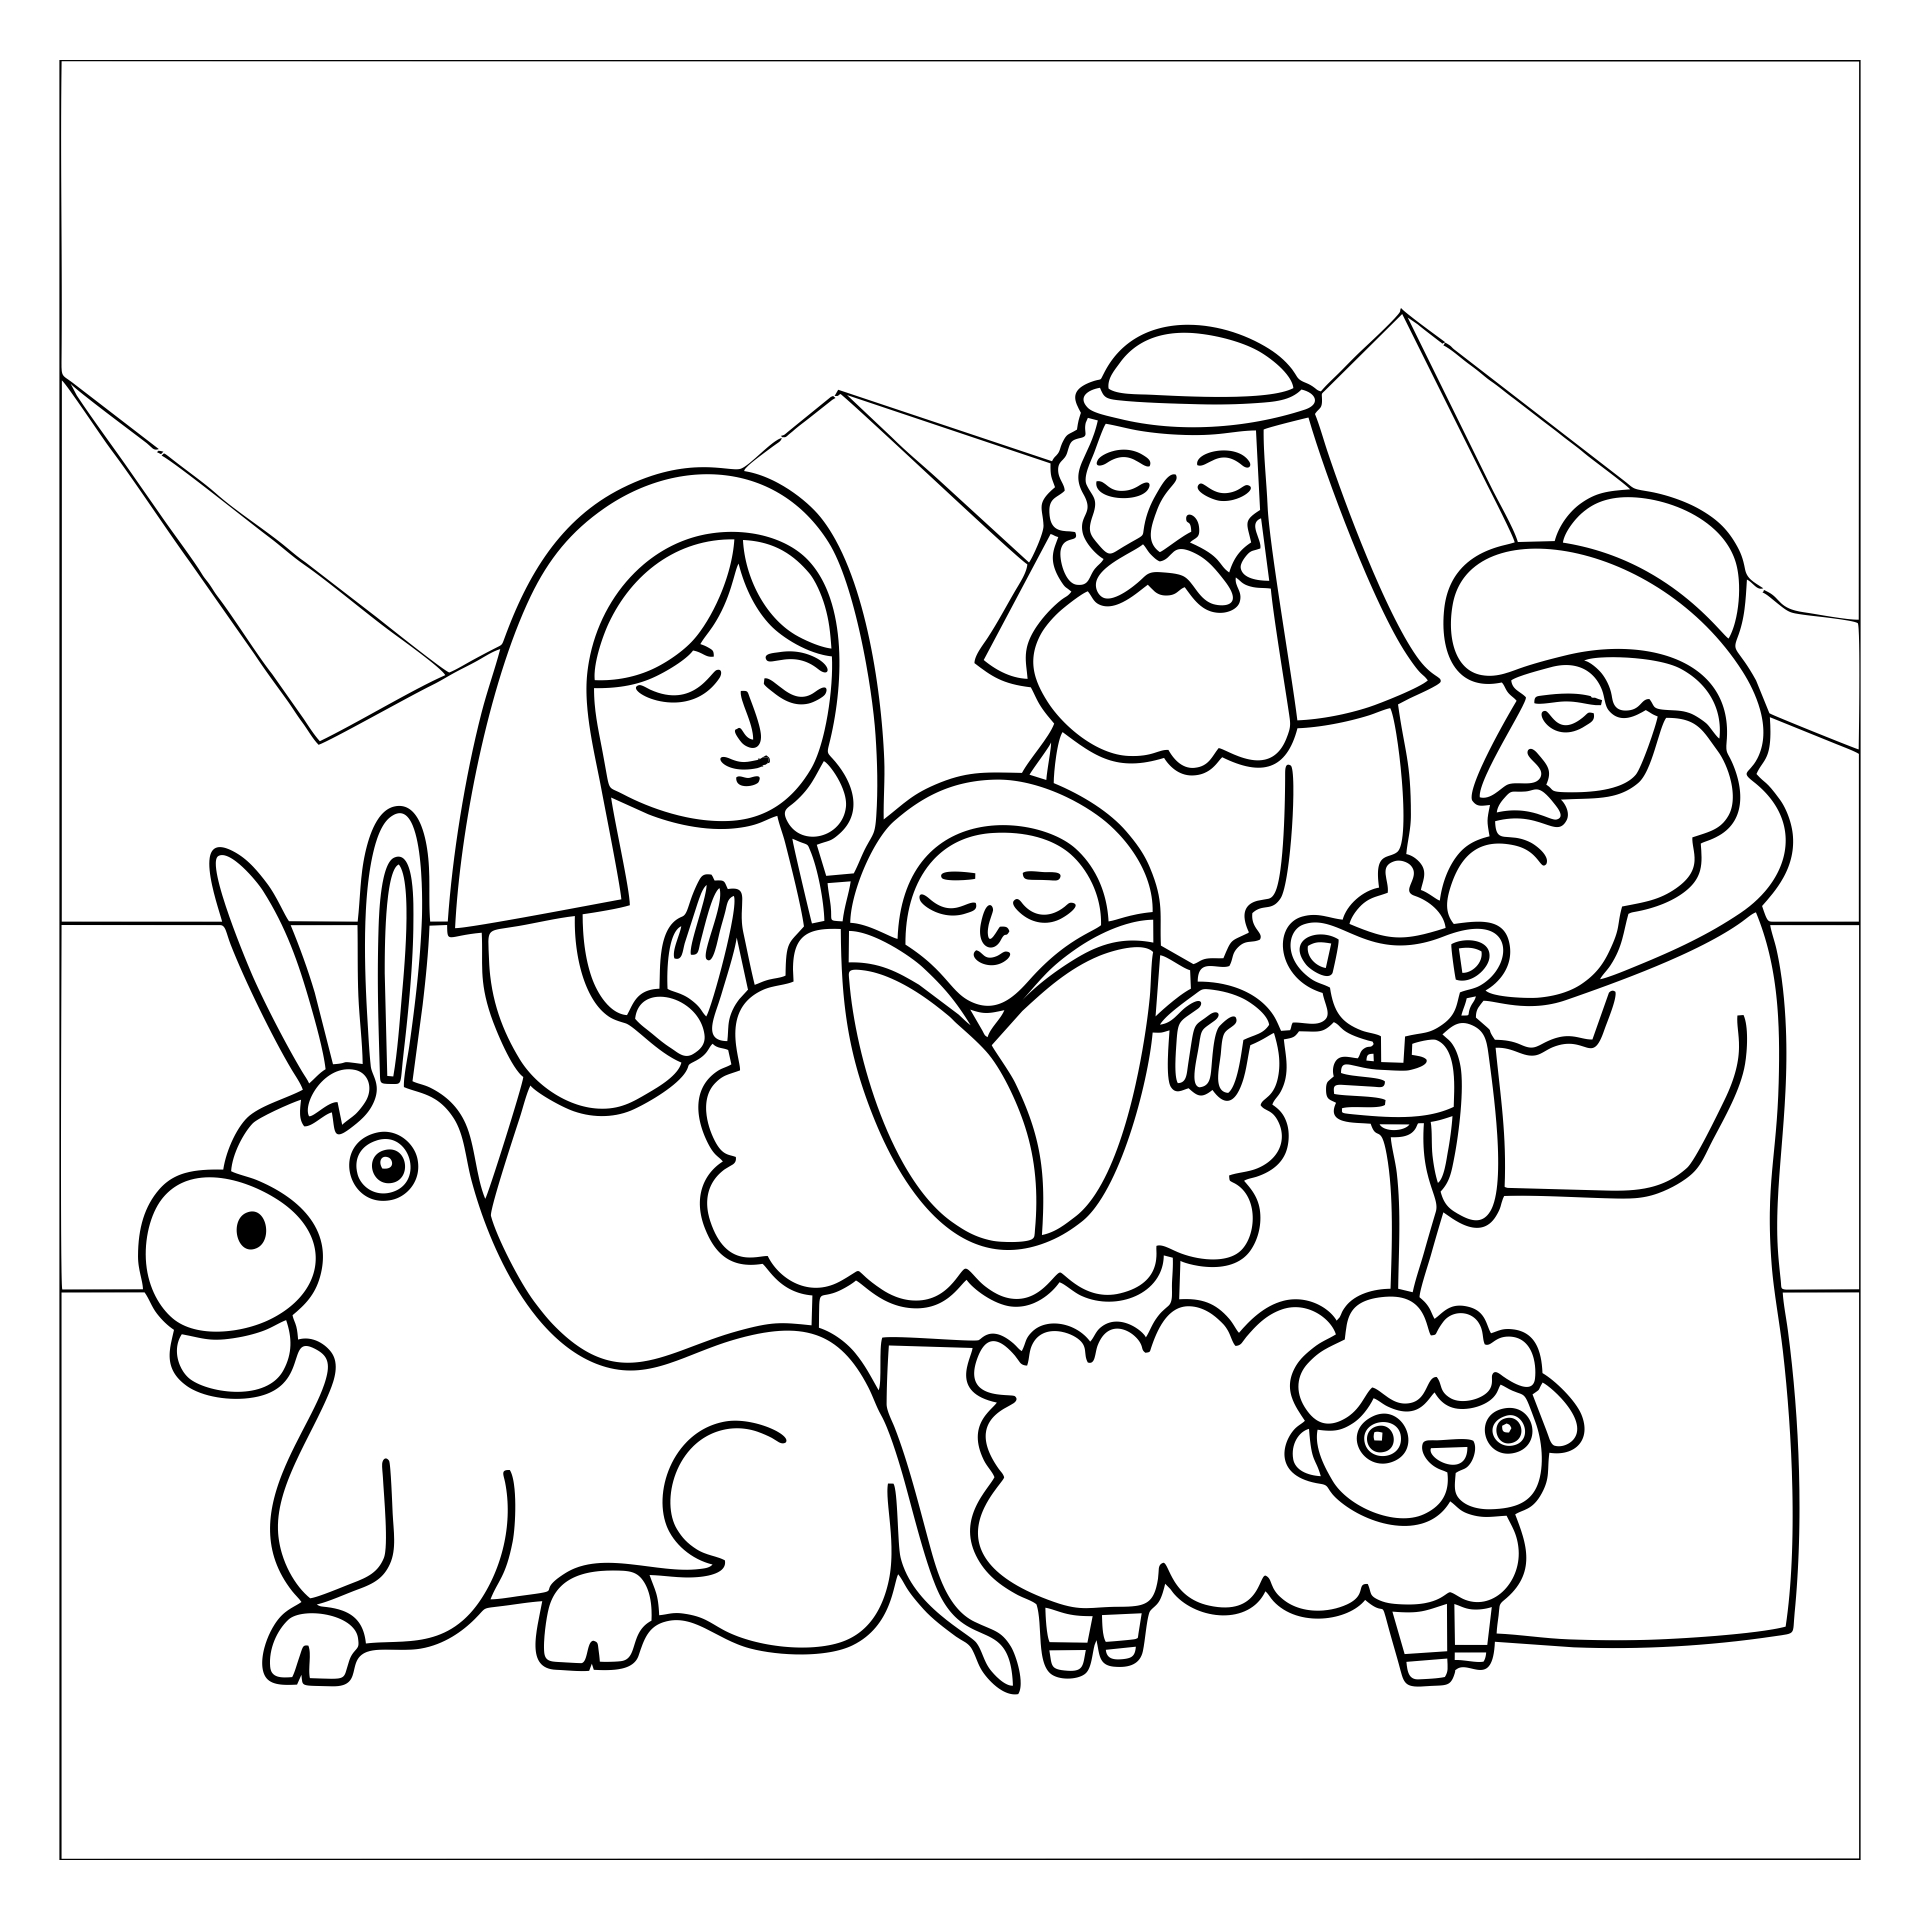 7 Best Images of Nativity Story Printable Book Printable Nativity Story